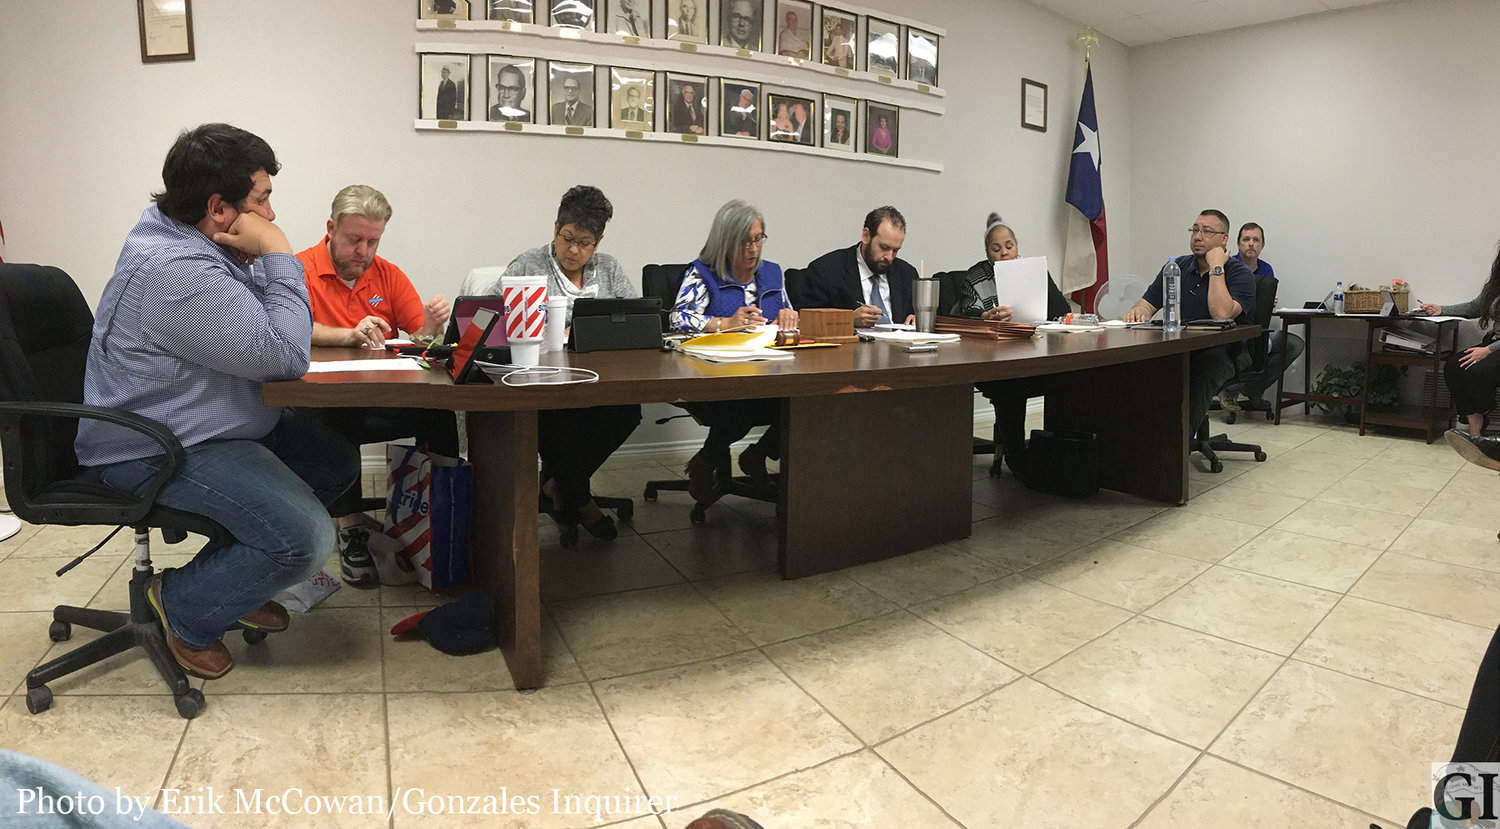 The Nixon city council met Tuesday night to discuss building a splash pad for the city and debating a new Cinco de Mayo festival downtown.